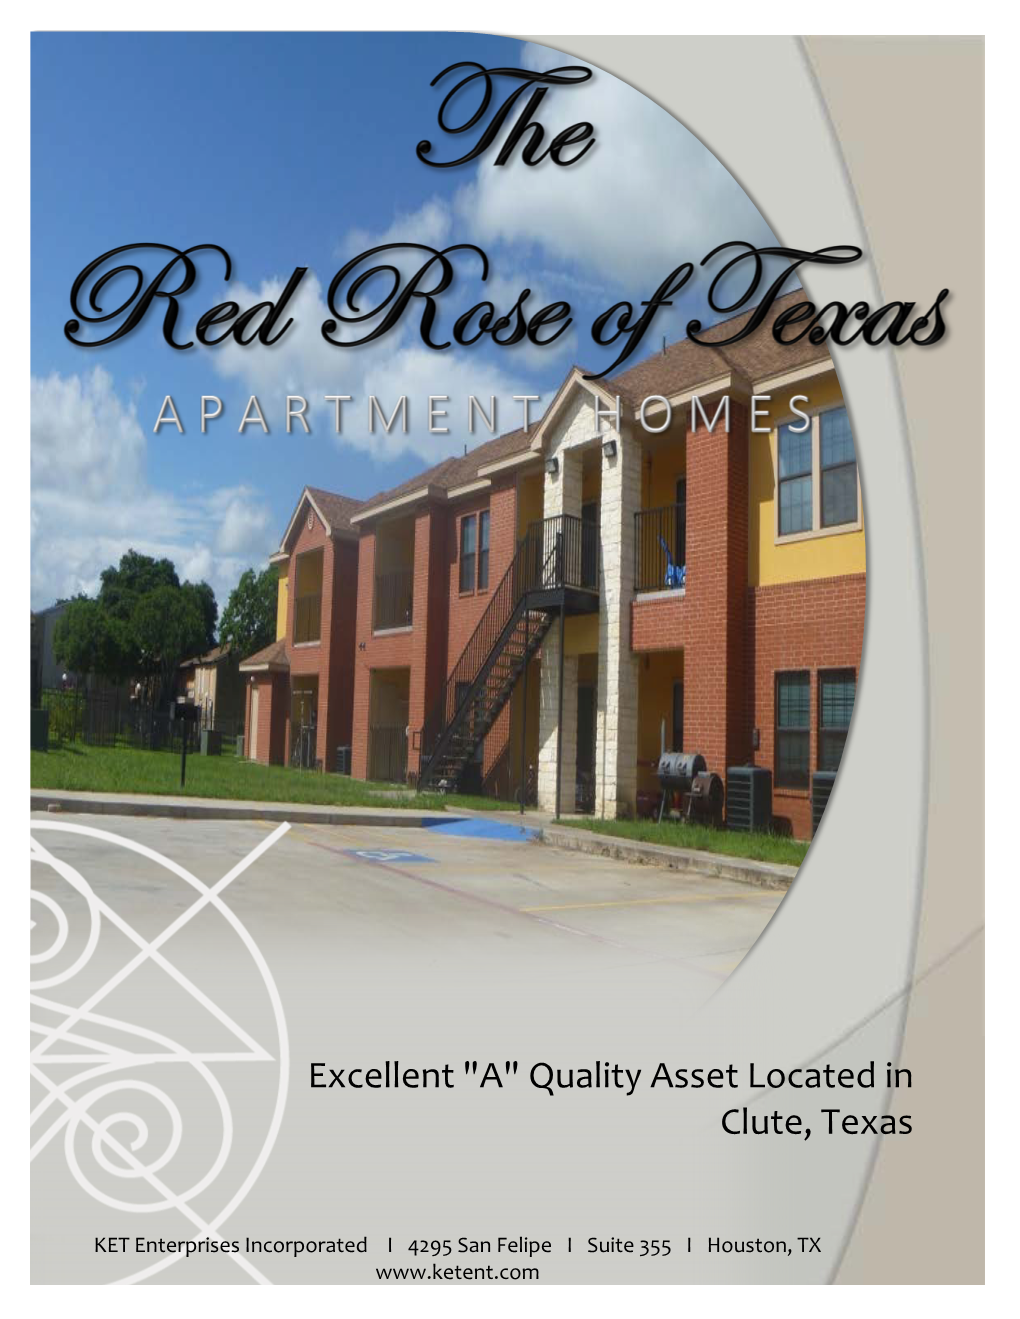 "A" Quality Asset Located in Clute, Texas